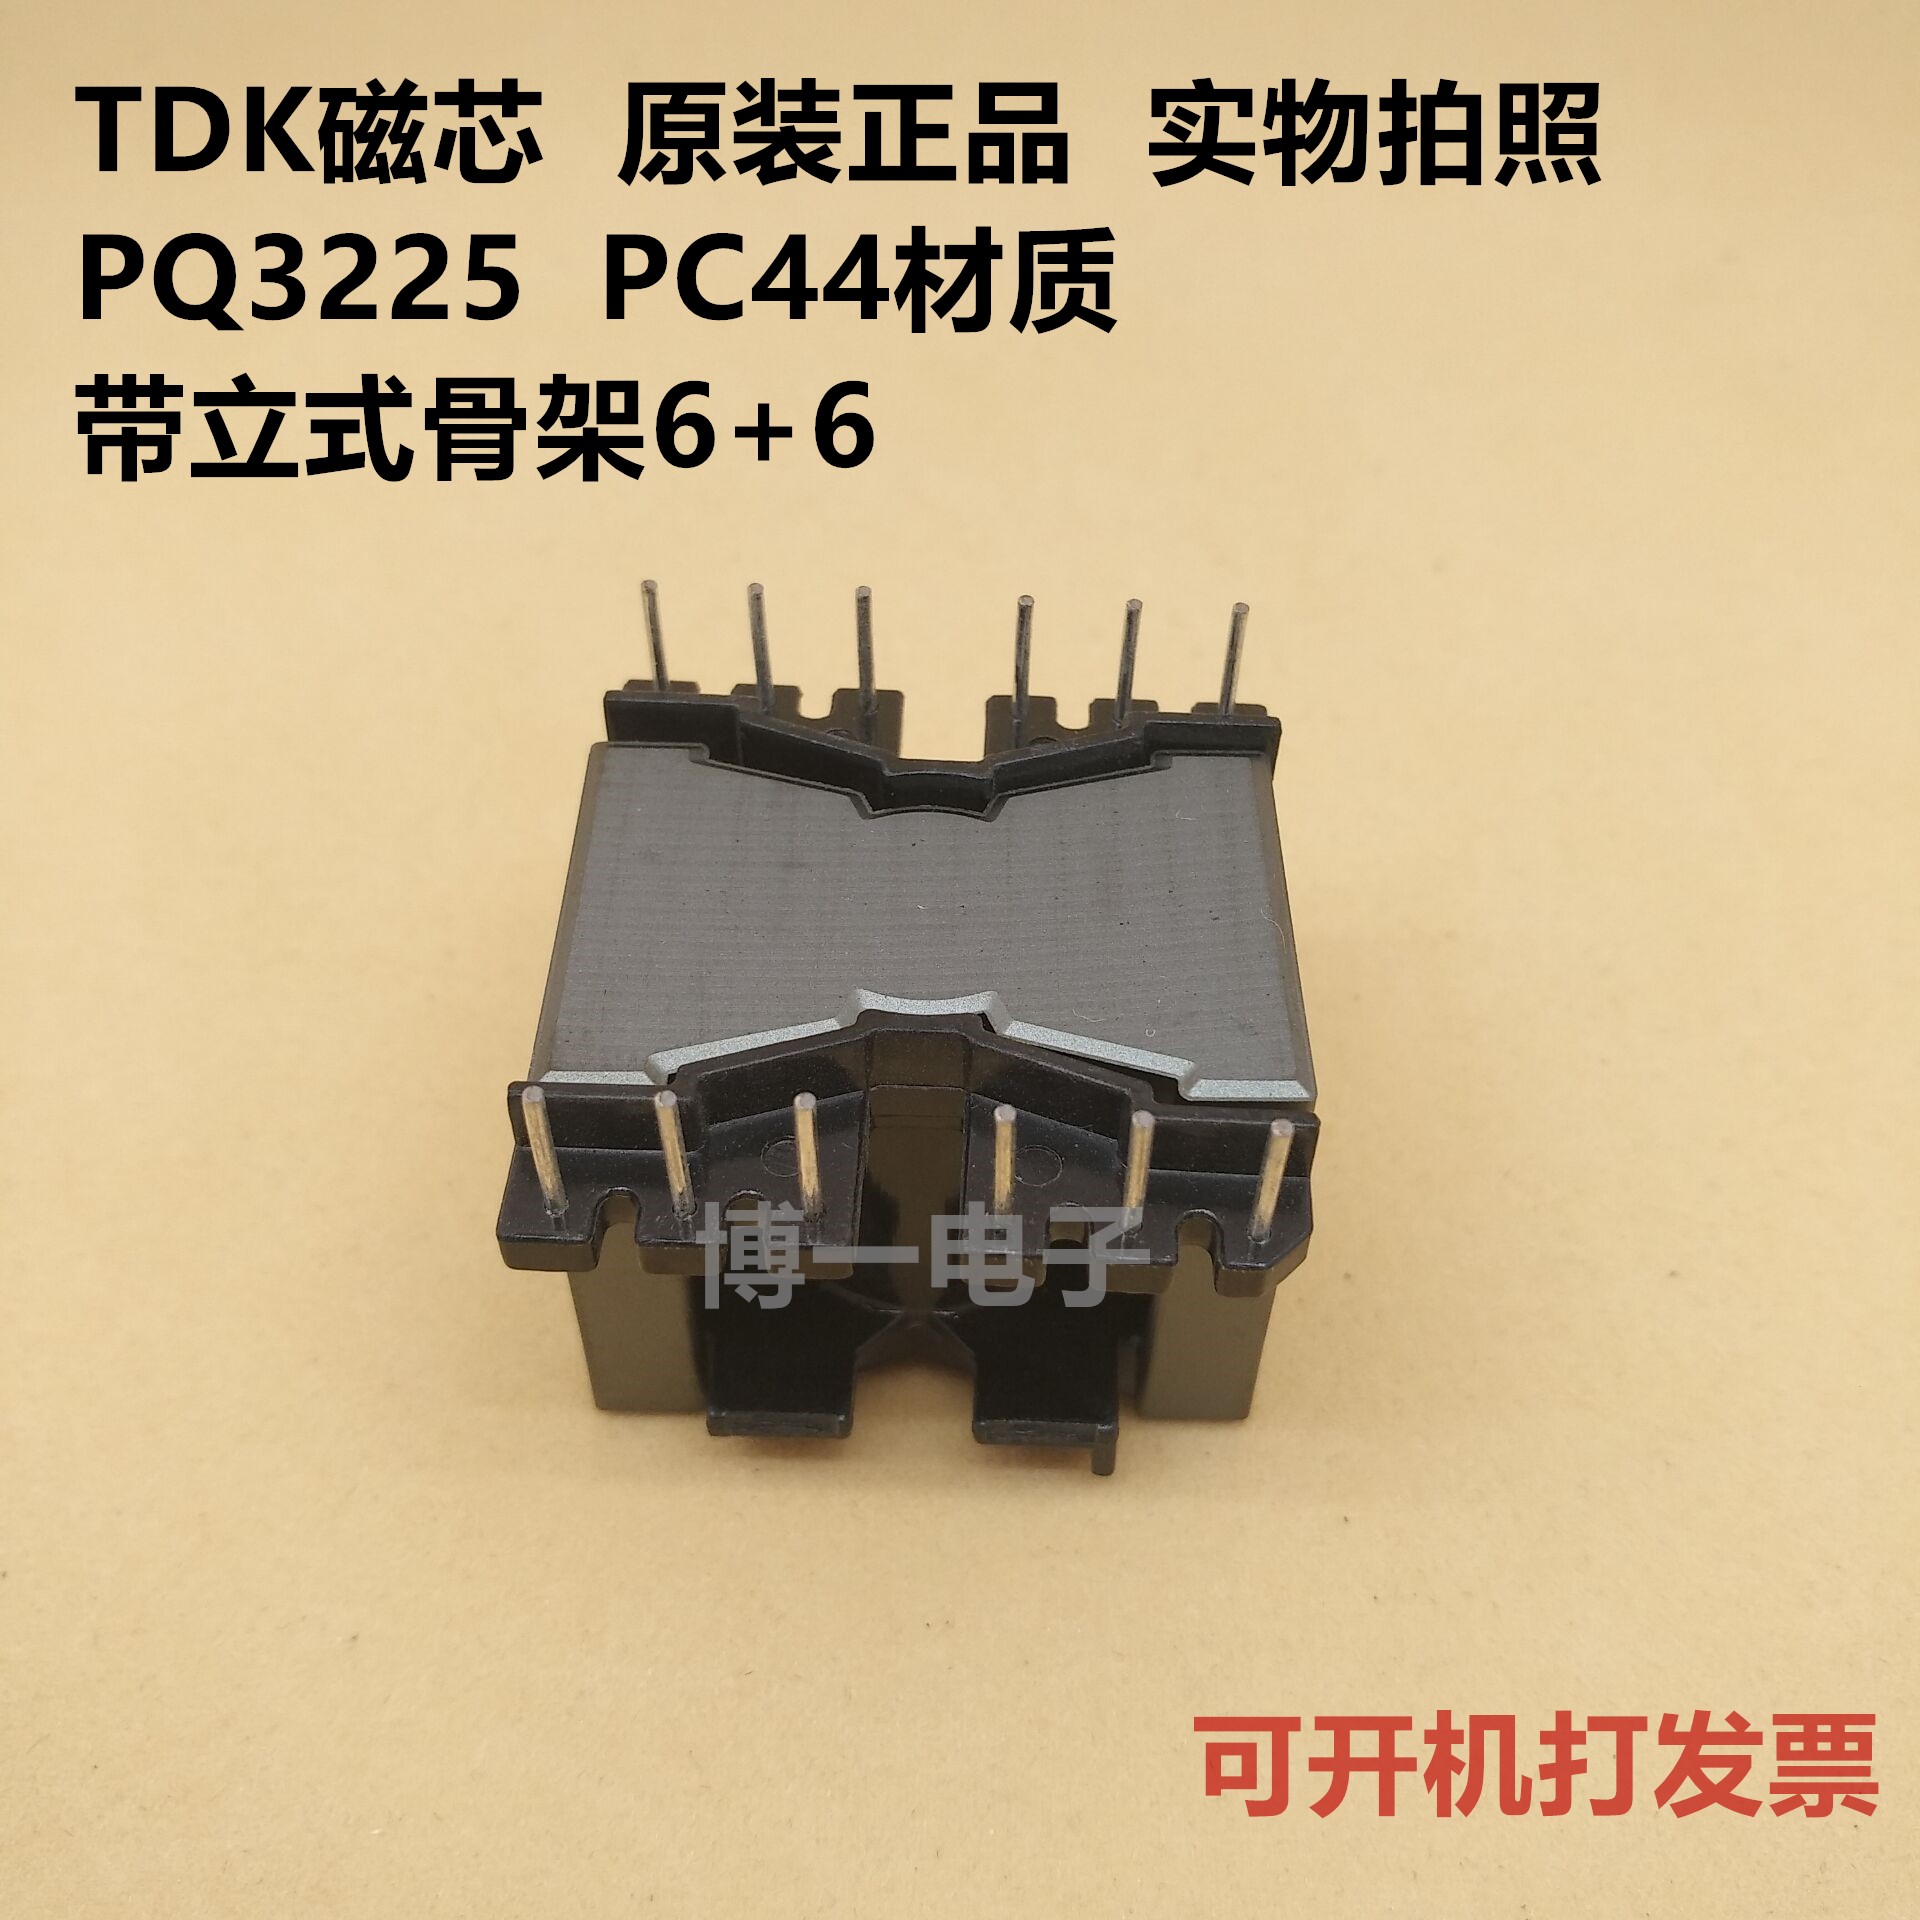 Original TDK PQ3225 Imported Ferrite Core PC44 Material Spot can be equipped with a variety of skeletons